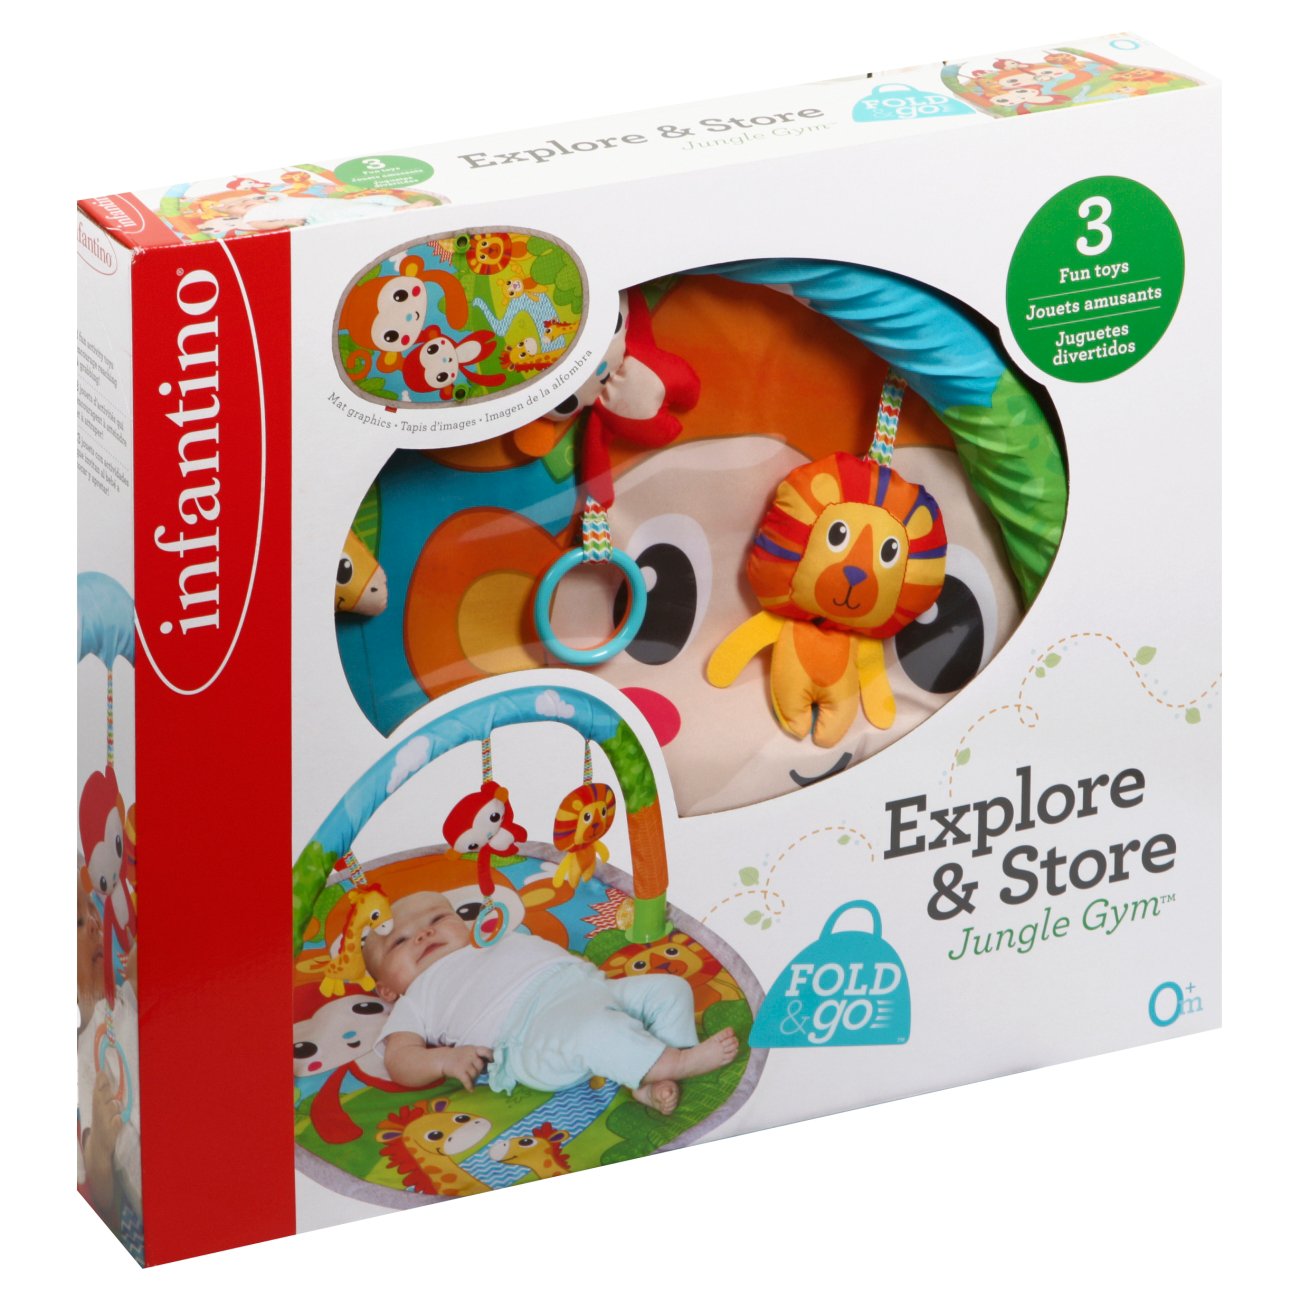 infantino explore and store activity gym